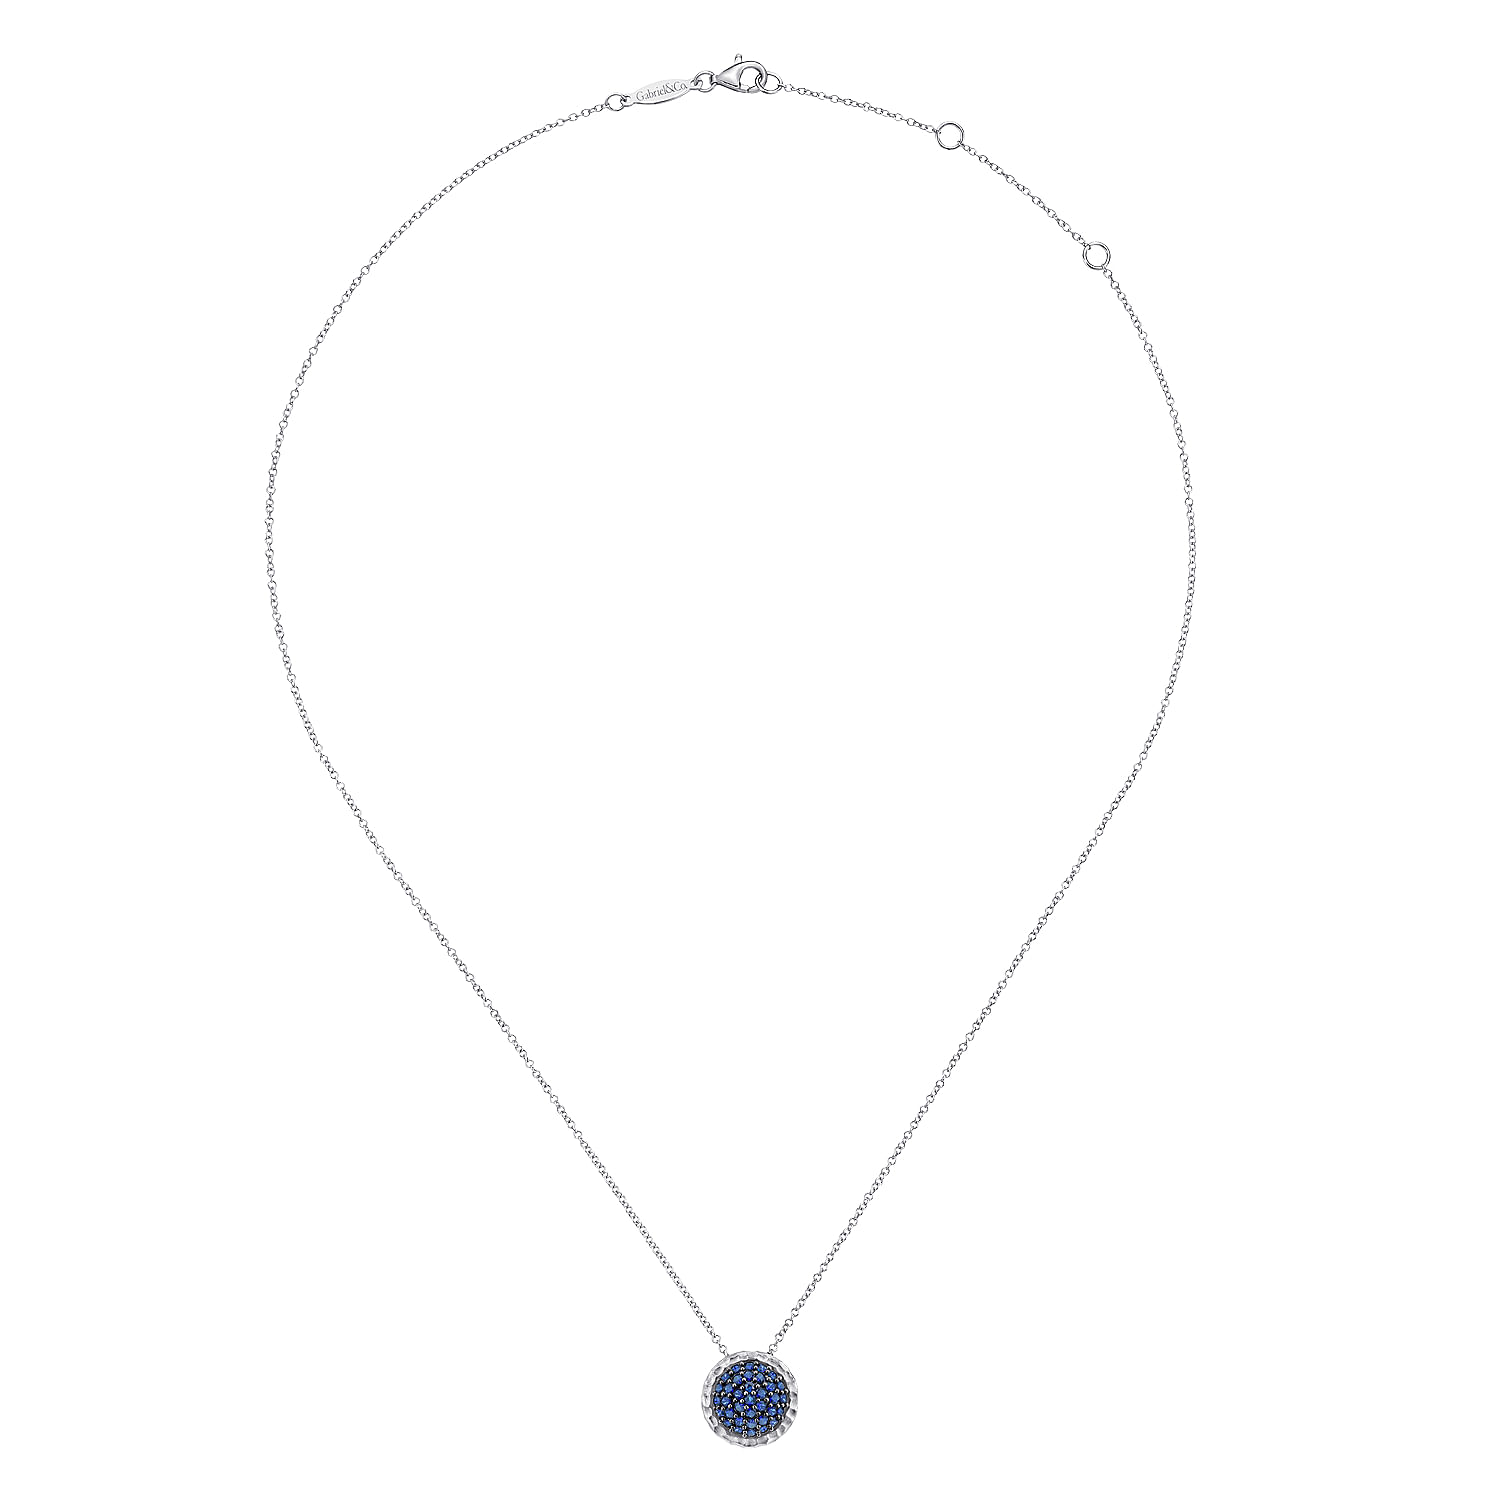 925 Sterling Silver Hammered Round Sapphire Pendant Necklace